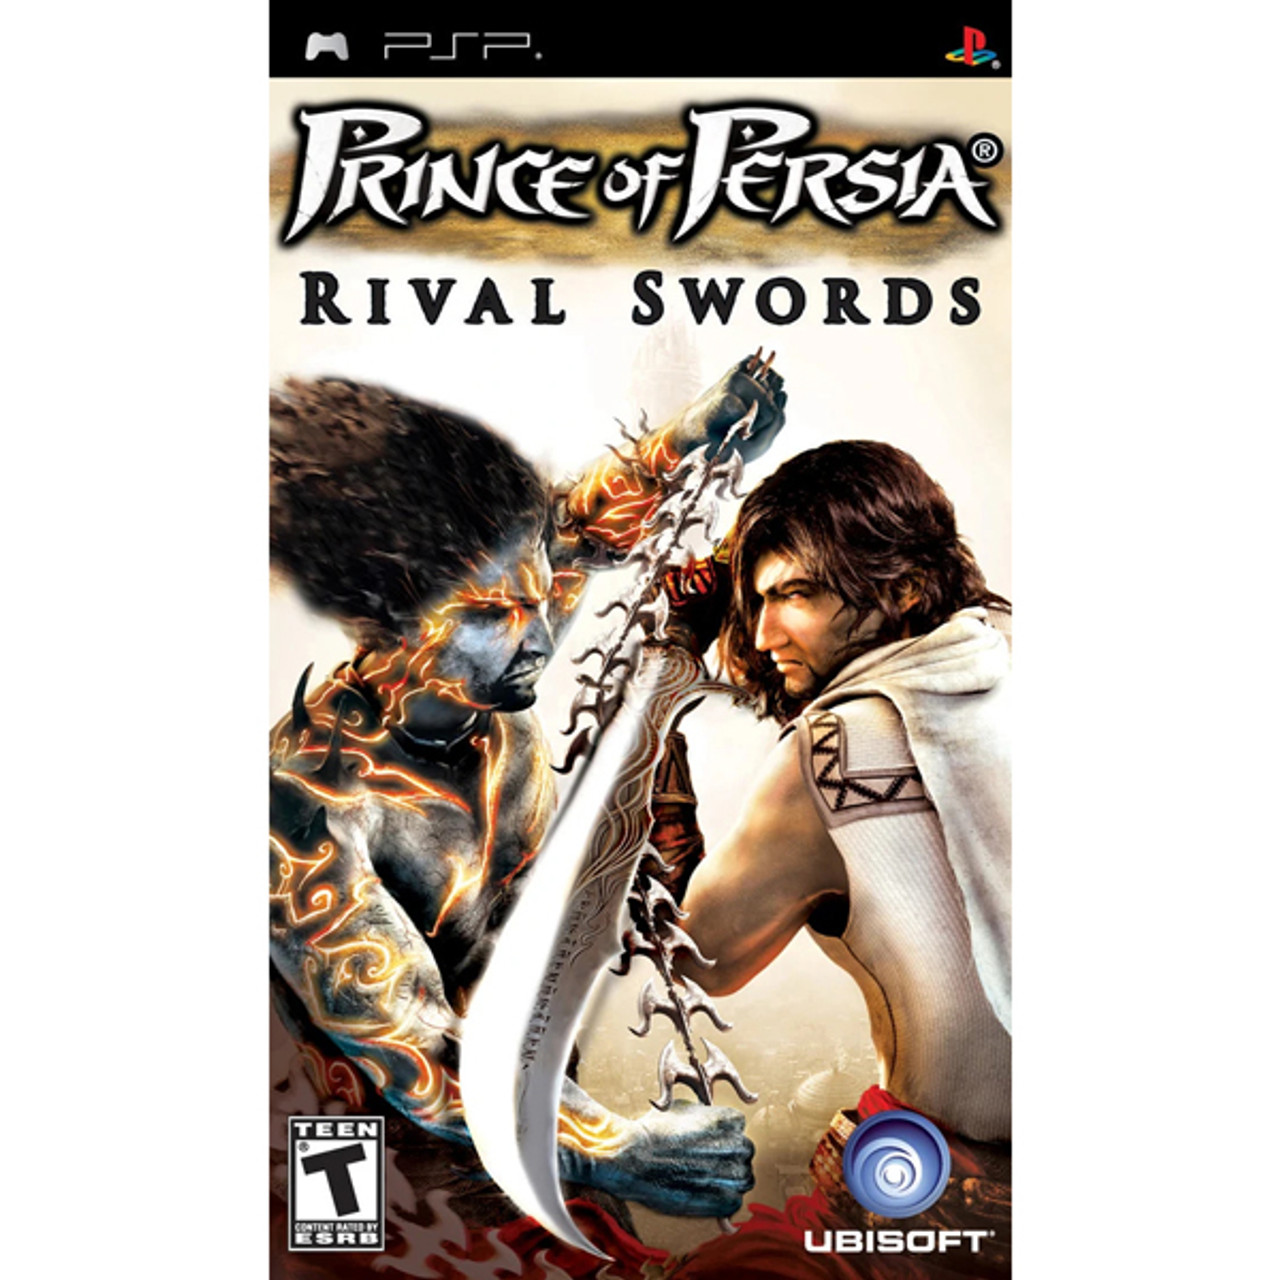 Prince of Persia: Rival Swords - psp - Walkthrough and Guide - Page 2 -  GameSpy